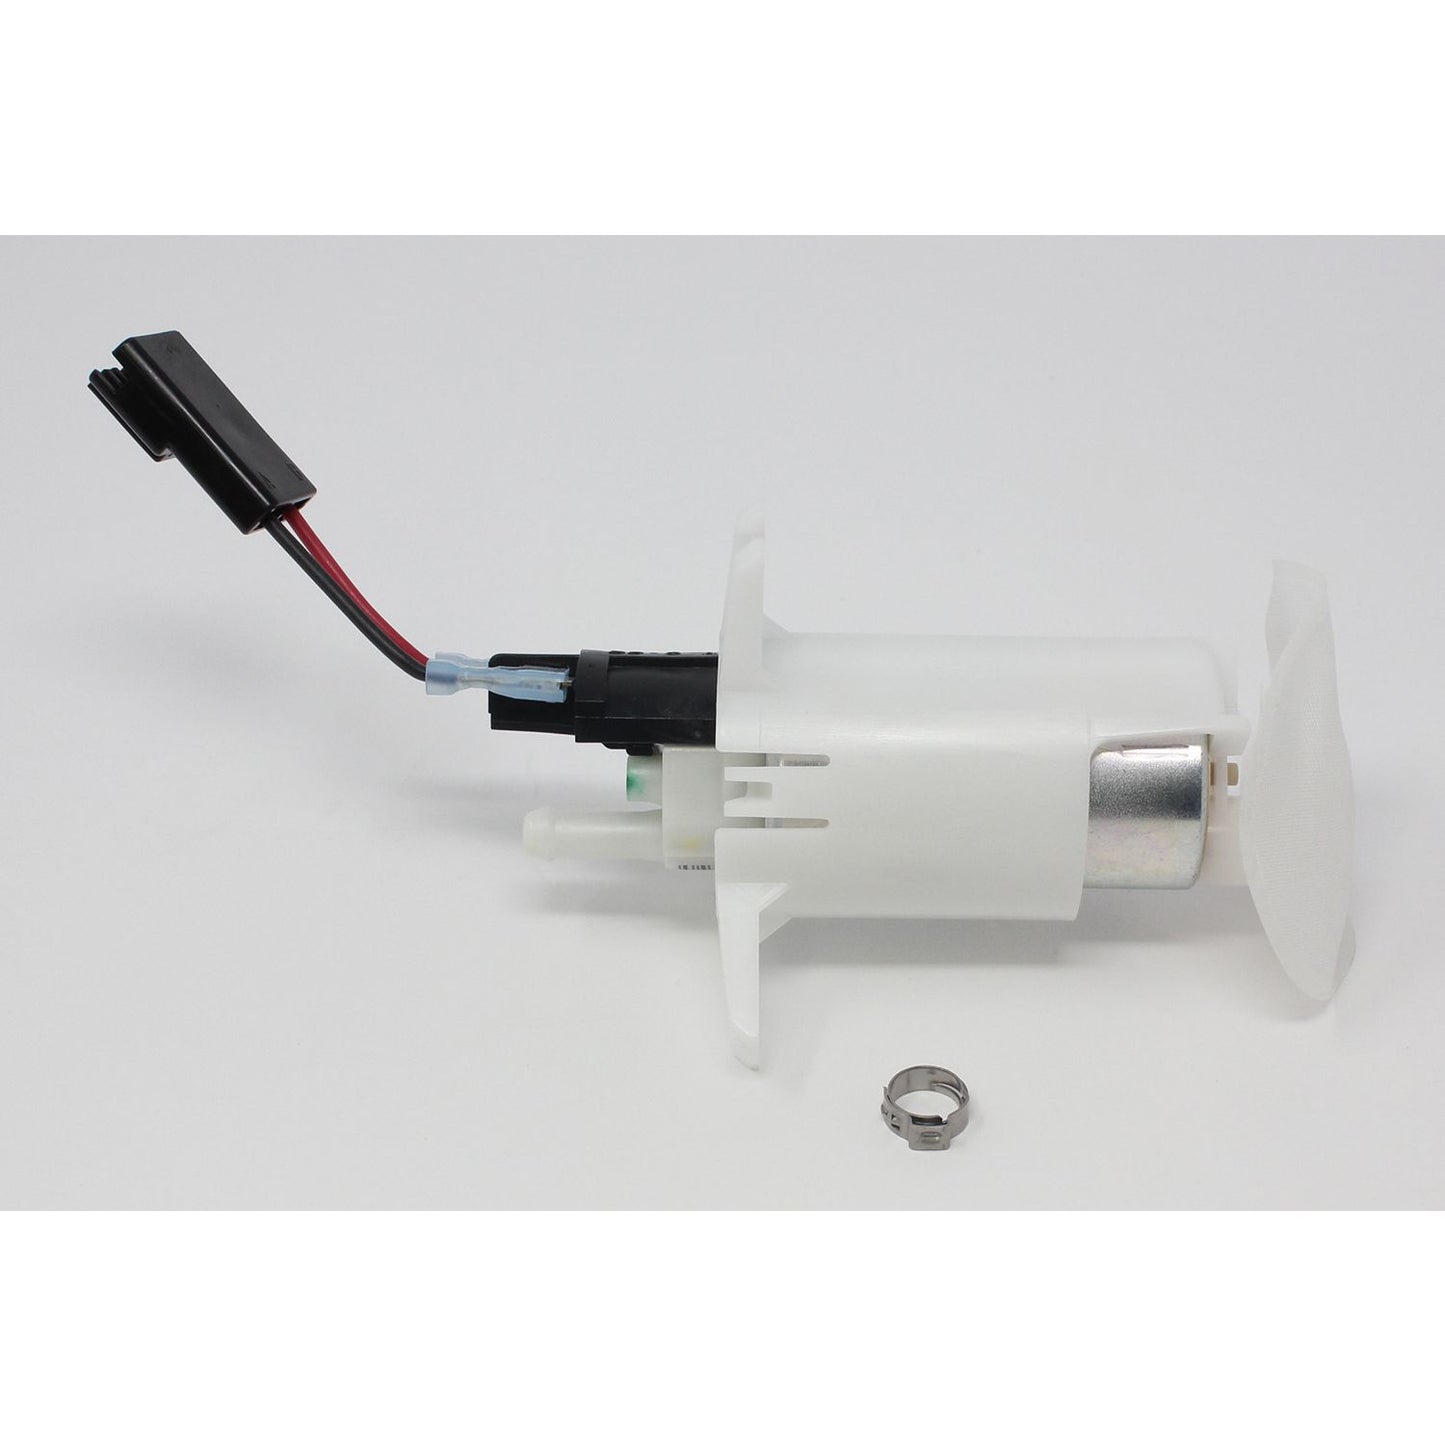 TI Automotive Stock Replacement Gas Pump Only, Installation Kit Not Included 78 163 00